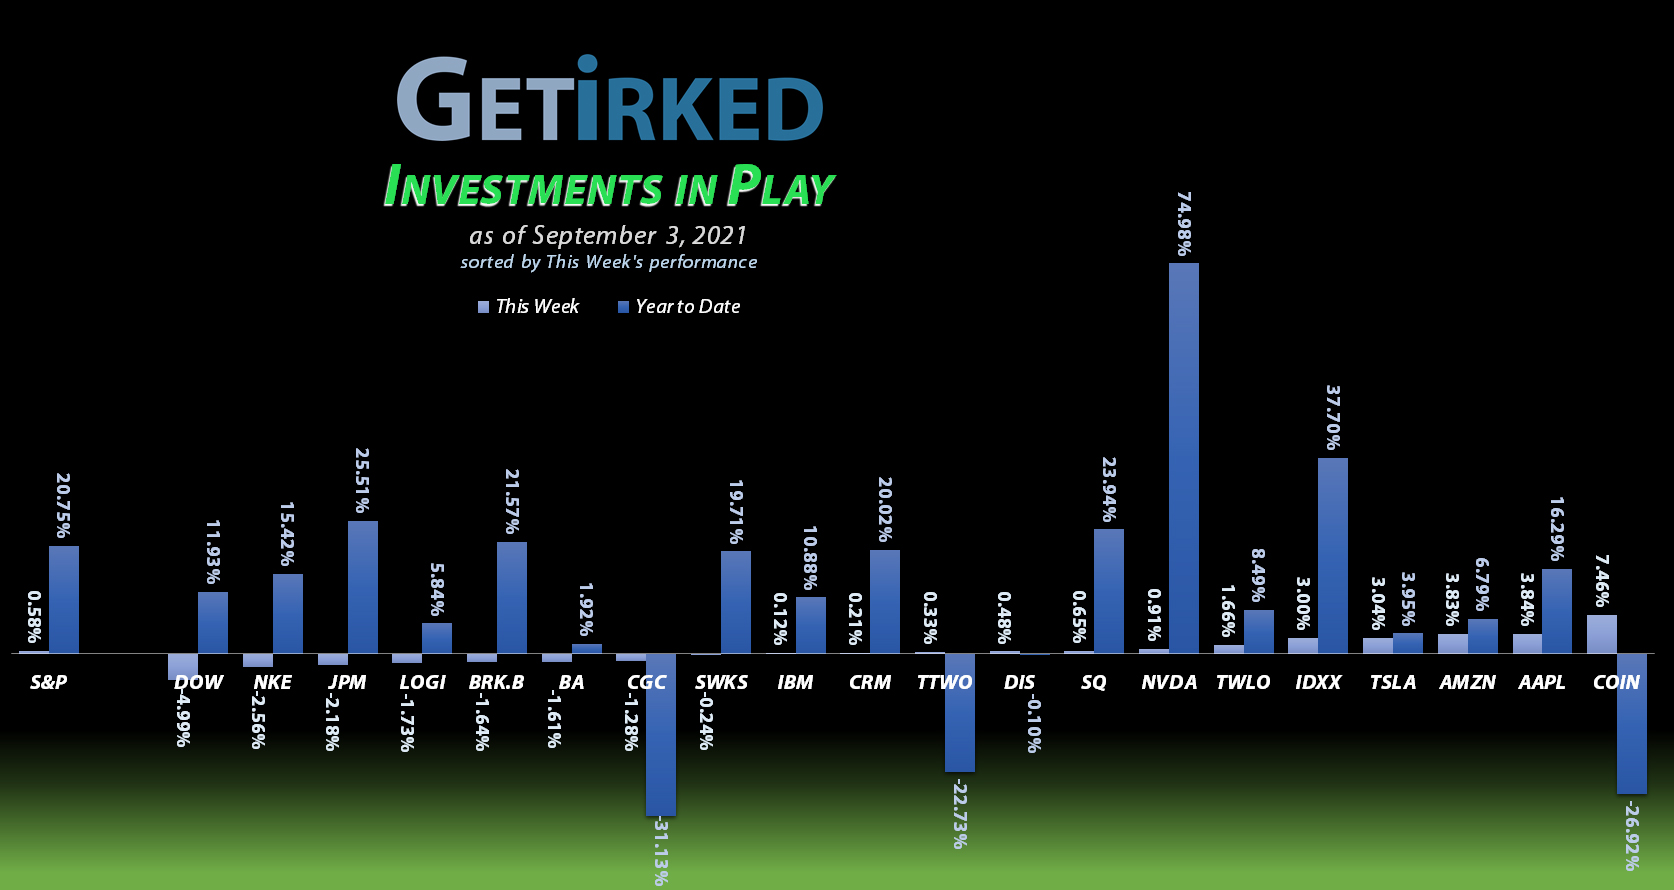 Get Irked - Investments in Play - September 3, 2021